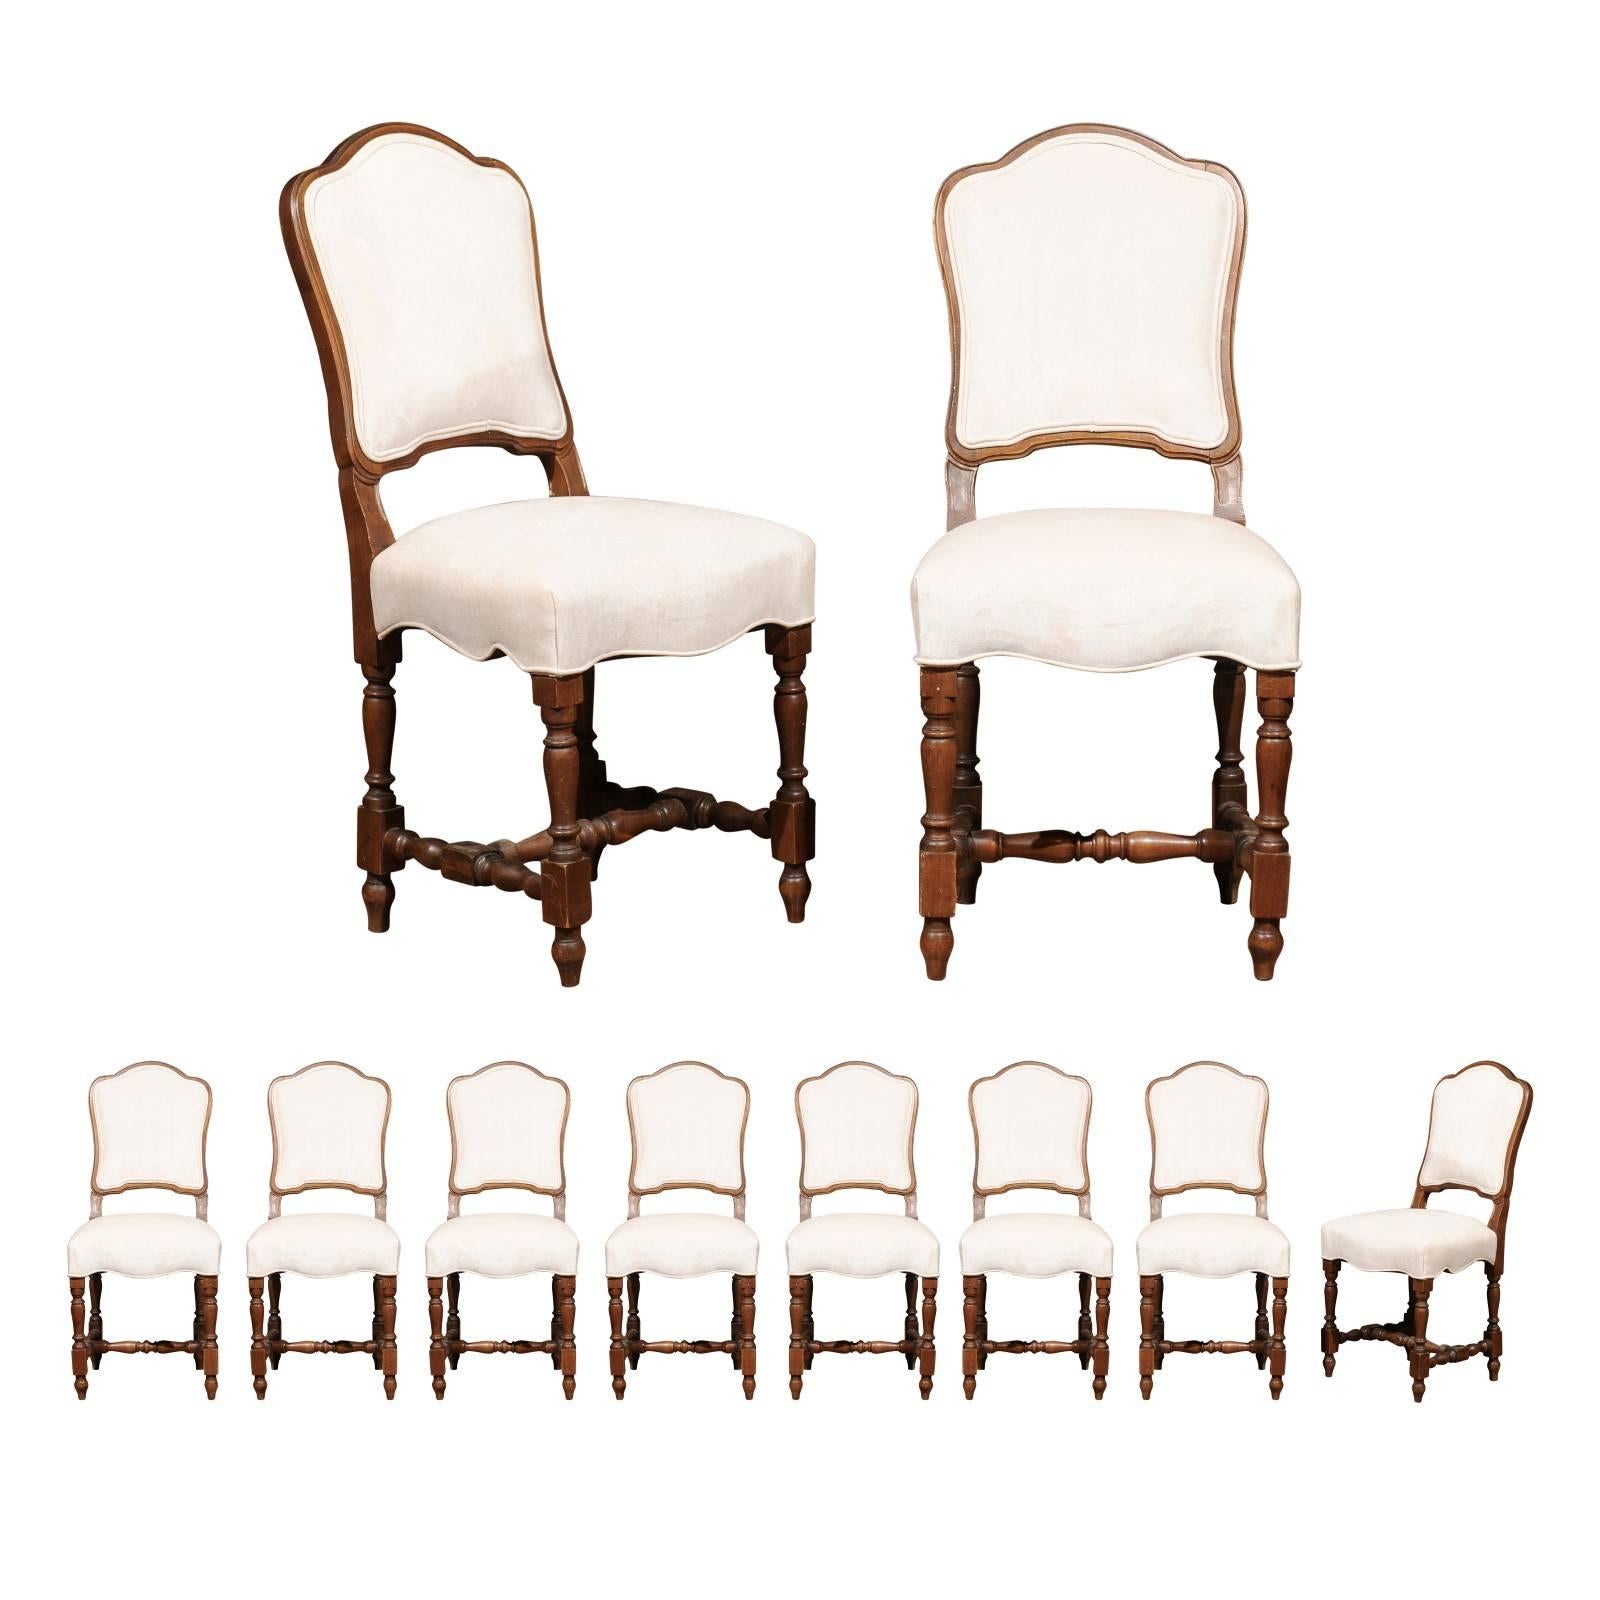 Set of Ten French Chaises à La Reine with Turned Legs with New Upholstery, 1880s